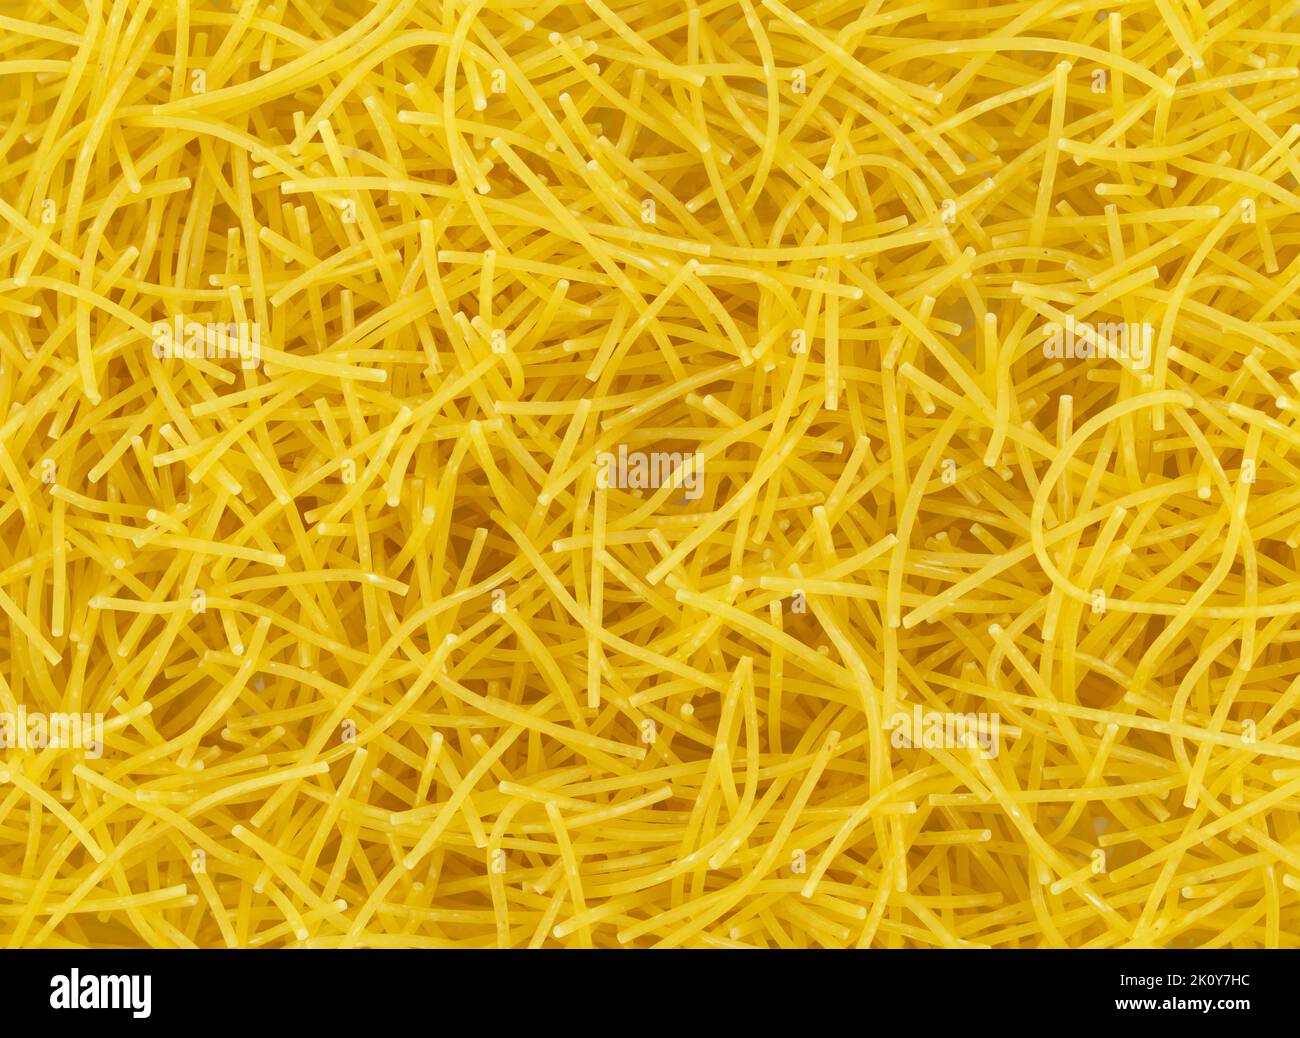 A very close view of dry thin soup noodles. Stock Photo